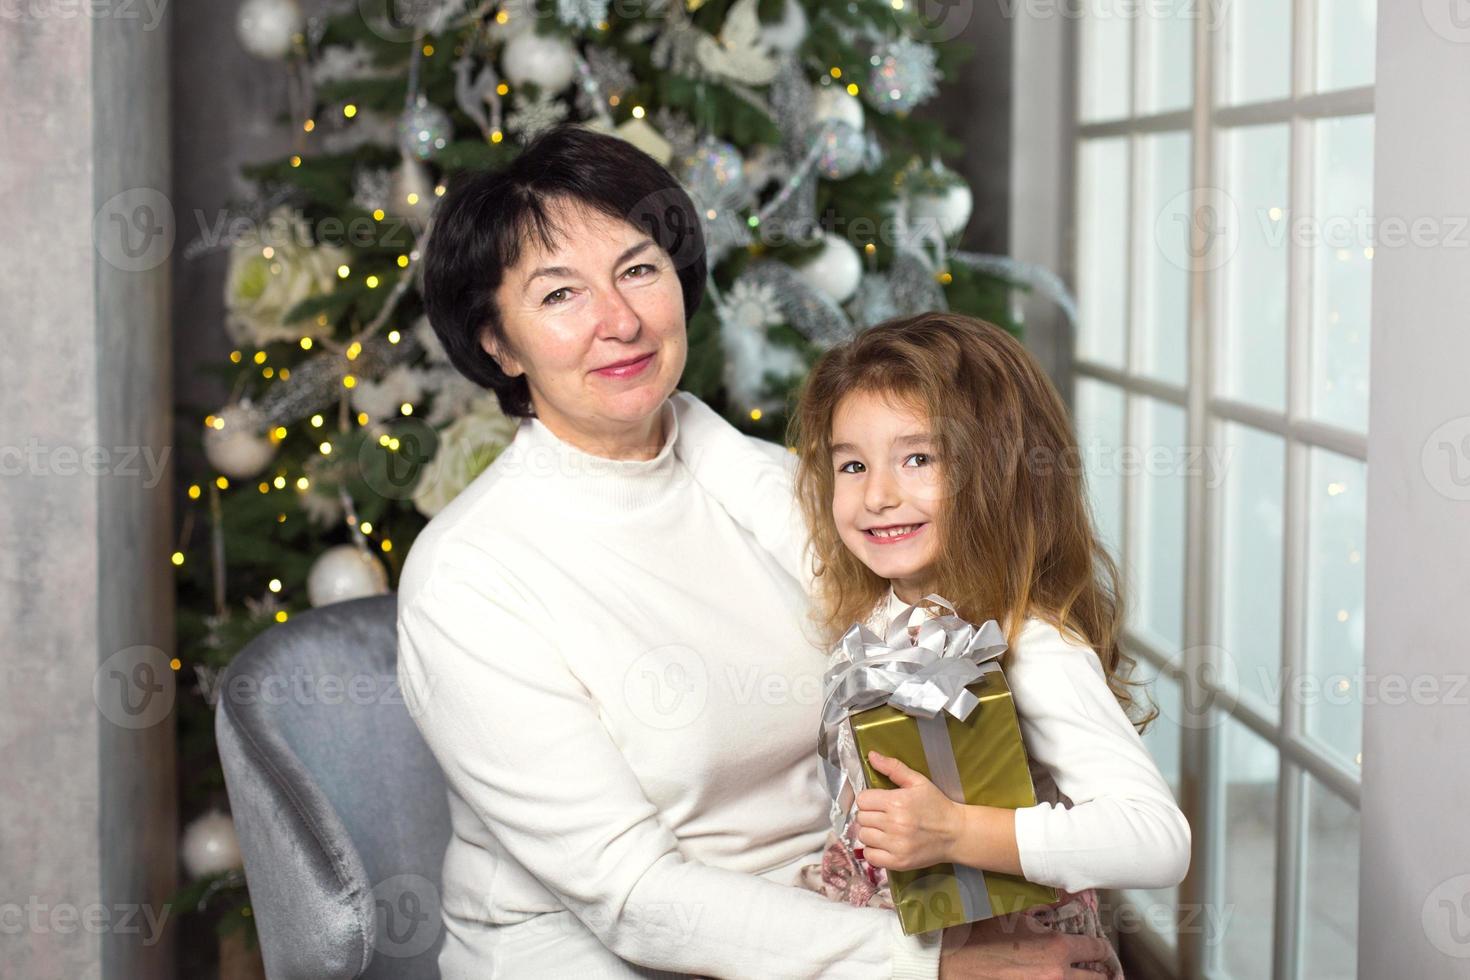 Grandmother with a little girl on the background of Christmas decorations and a large window. Family holiday, emotions, gift box. Granddaughter on granny's lap. New Year photo